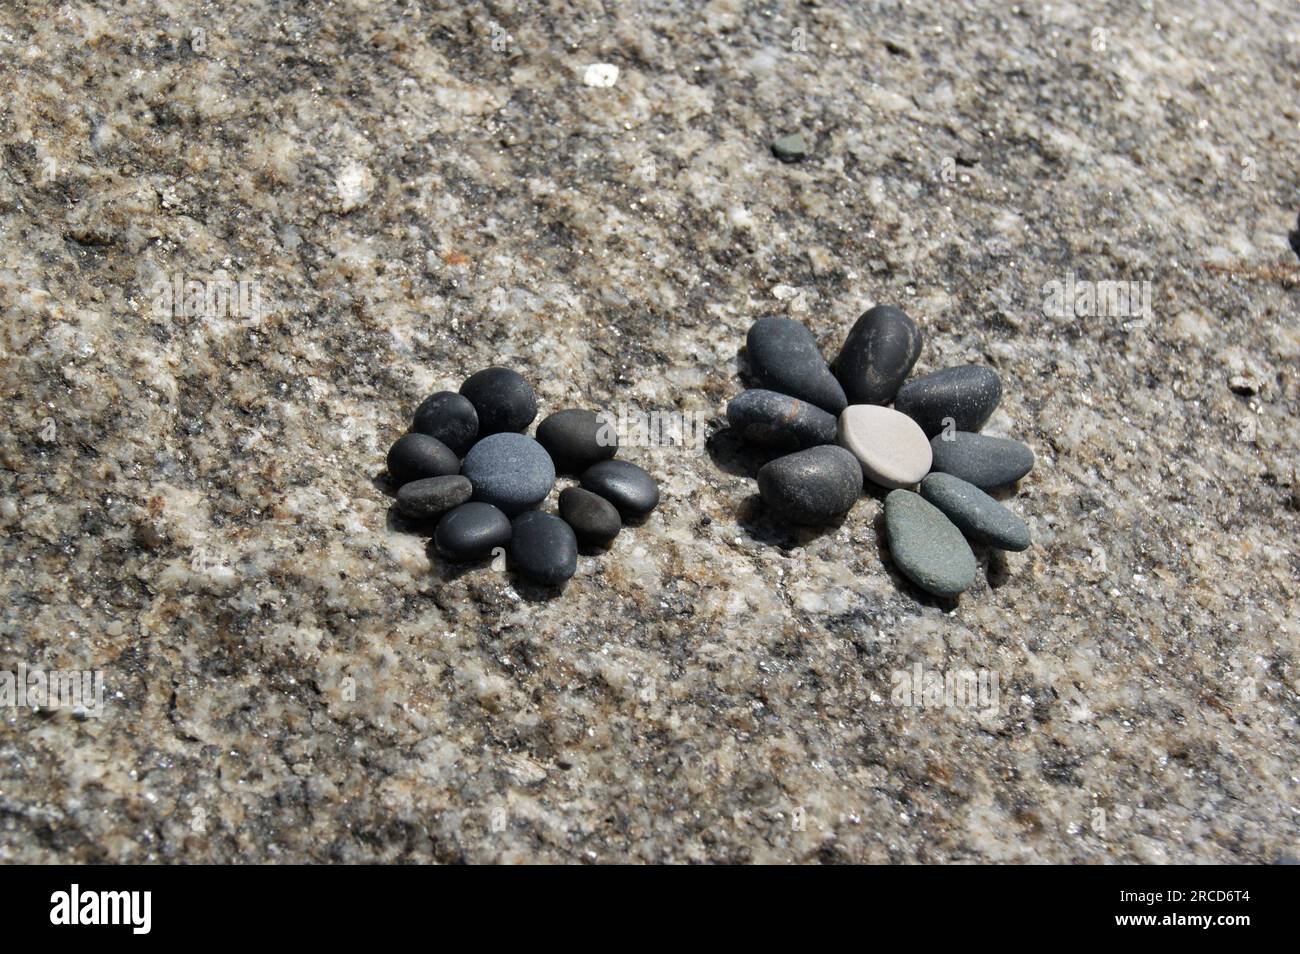 Stone garden decors. A flowers laid out of pebbles on a stone. Stock Photo